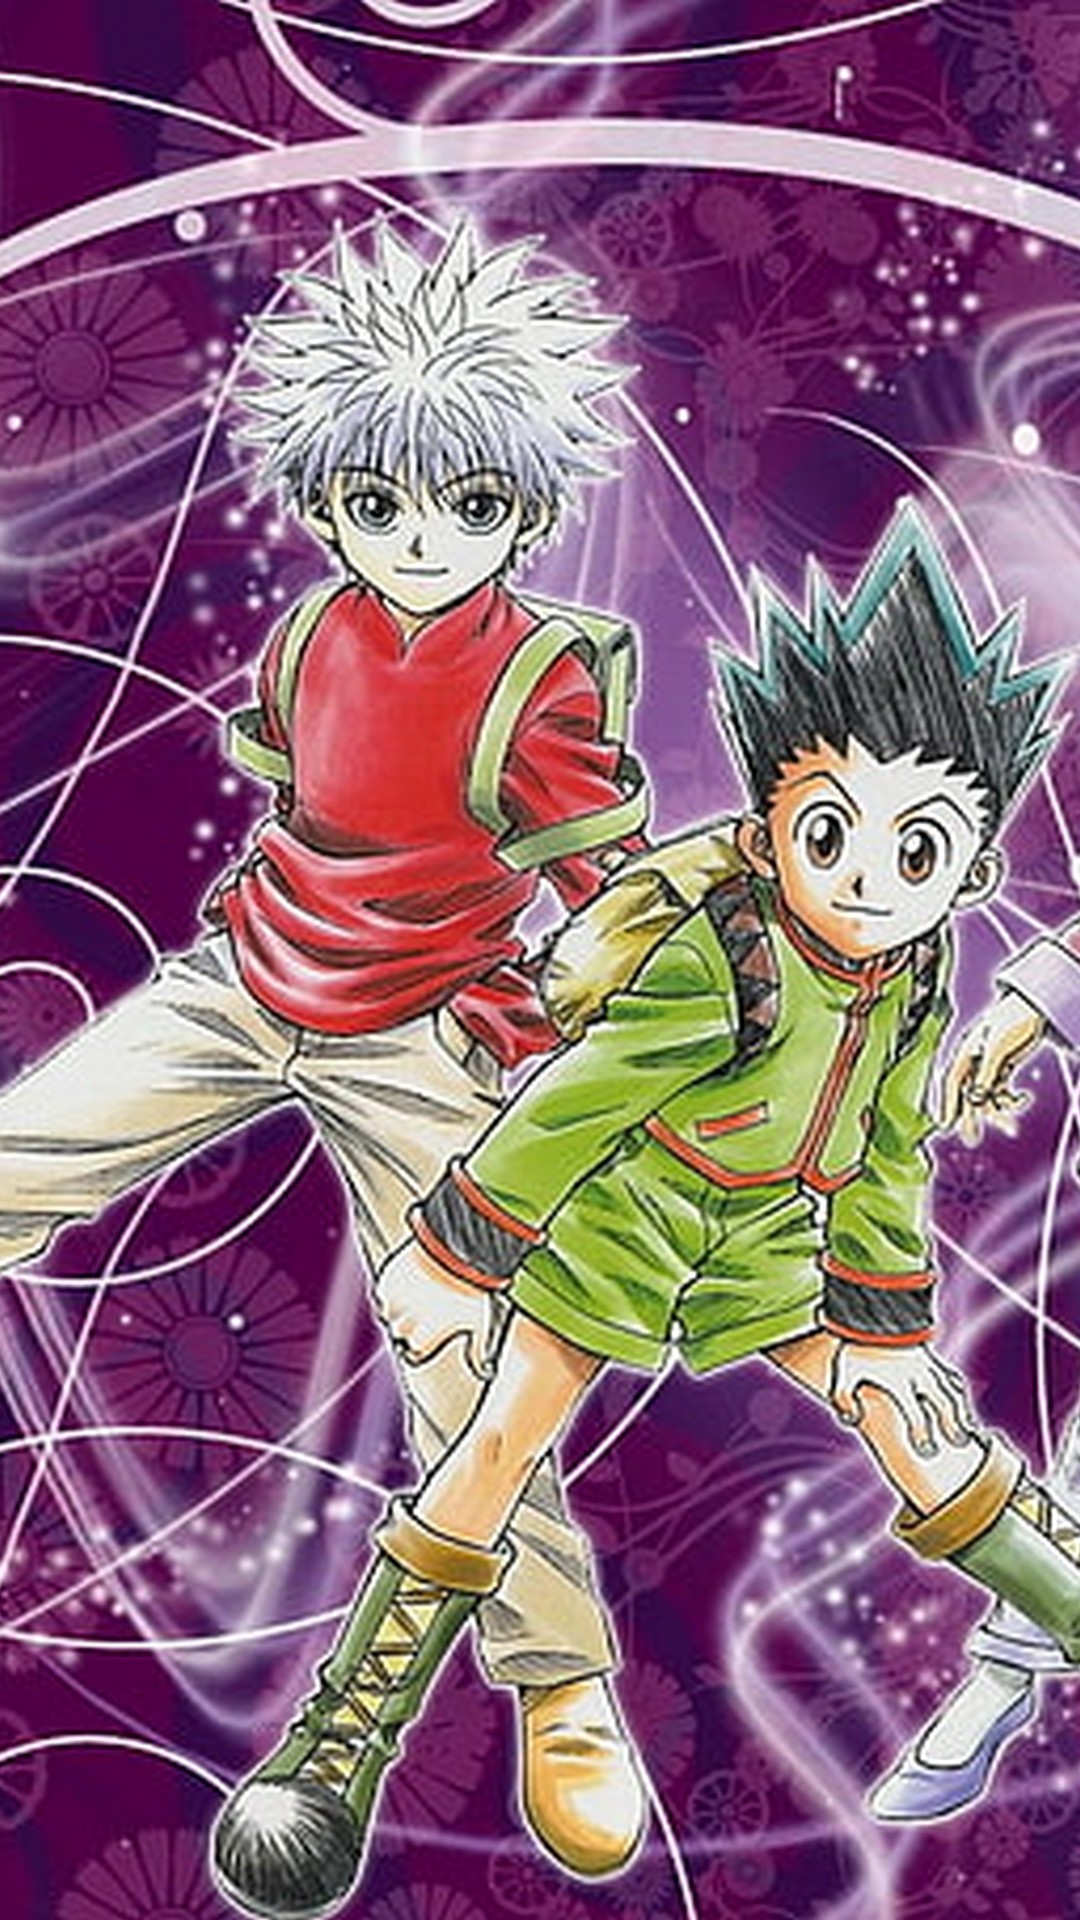 Gon And Killua Wallpaper for Phones with high-resolution 1080x1920 pixel. Download all Mobile Wallpapers and Use them as wallpapers for your iPhone, Tablet, iPad, Android and other mobile devices